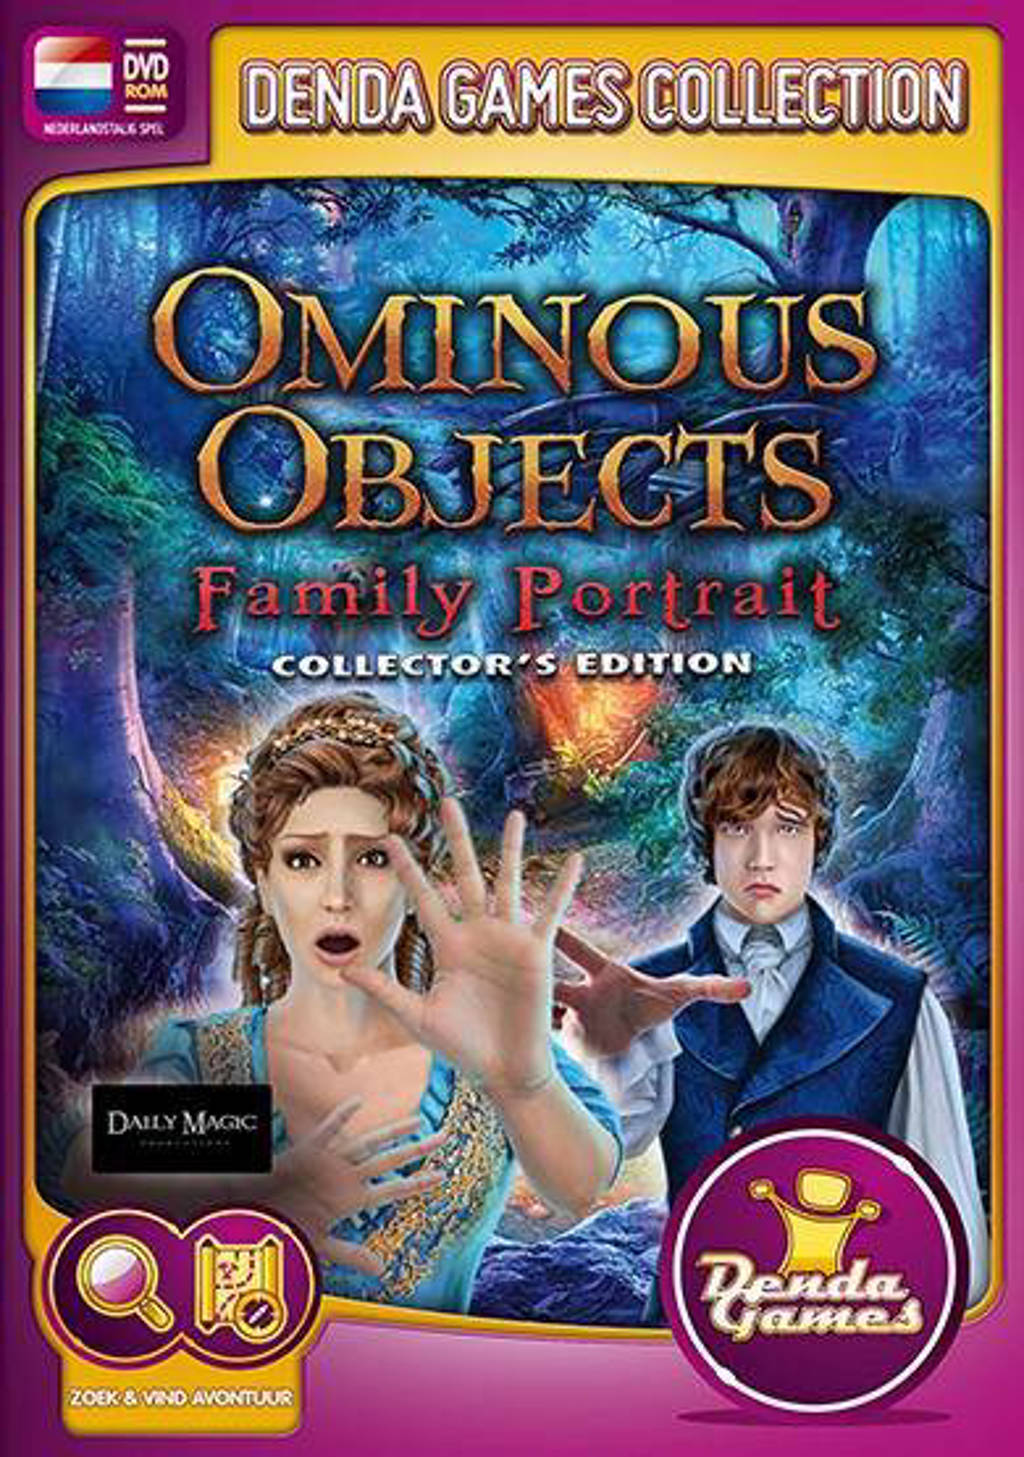 Omnious objects - Family portrait (Collectors edition) (PC)